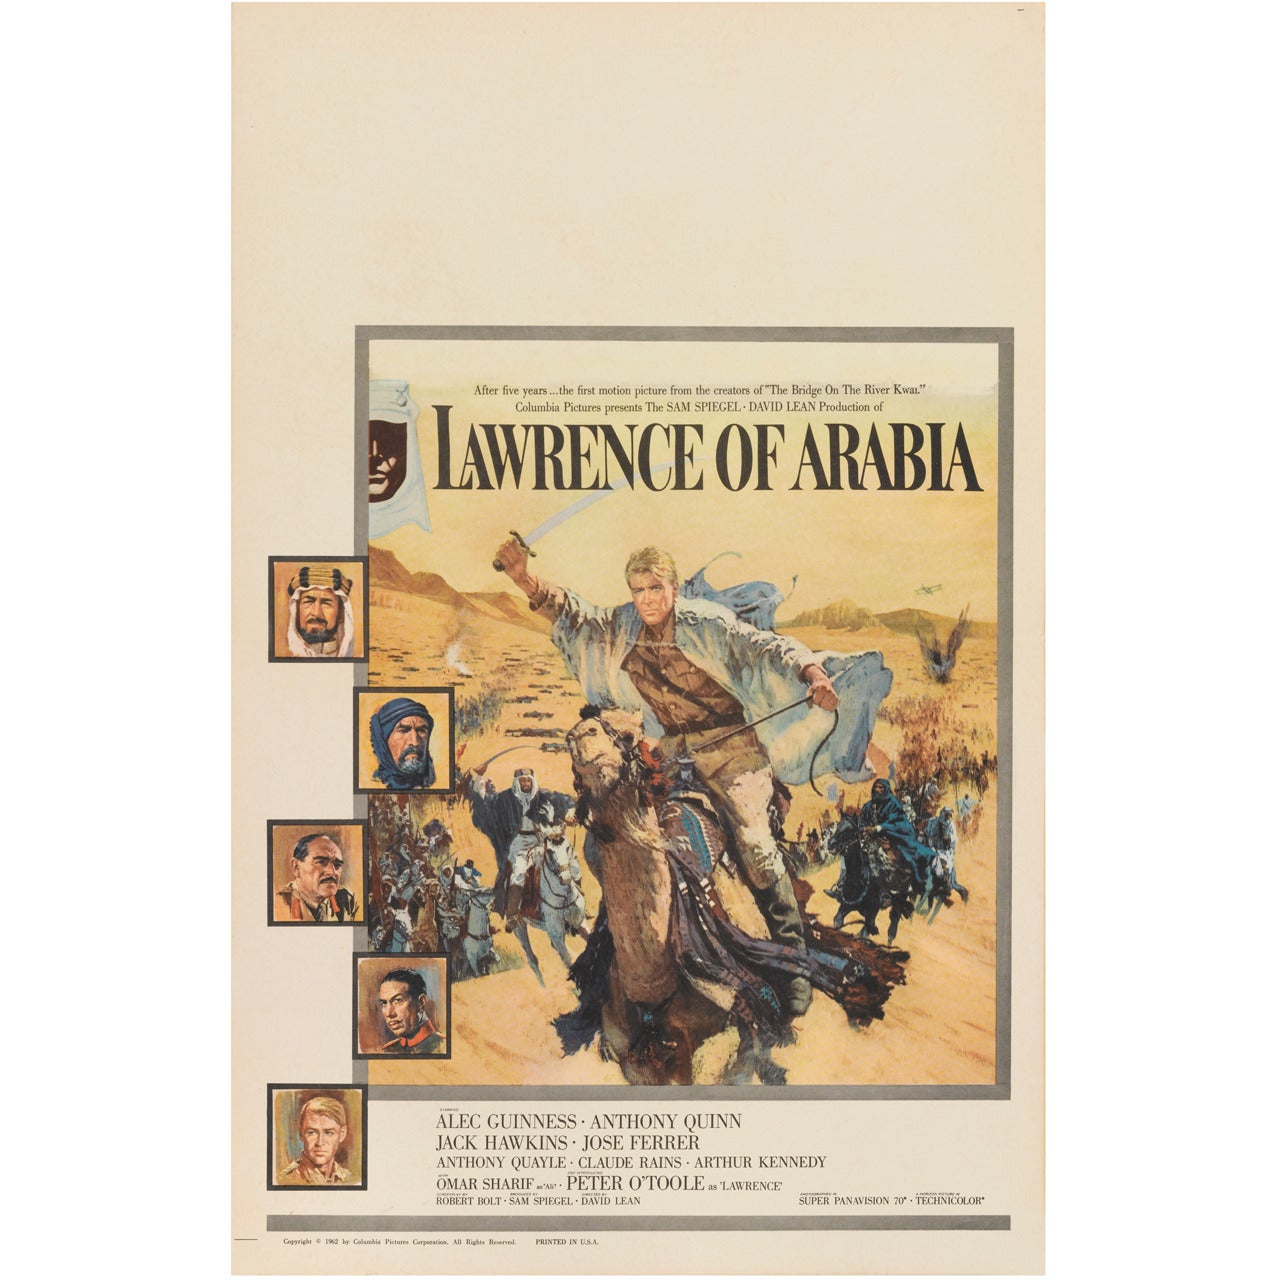 Film Poster for, "Lawrence of Arabia"